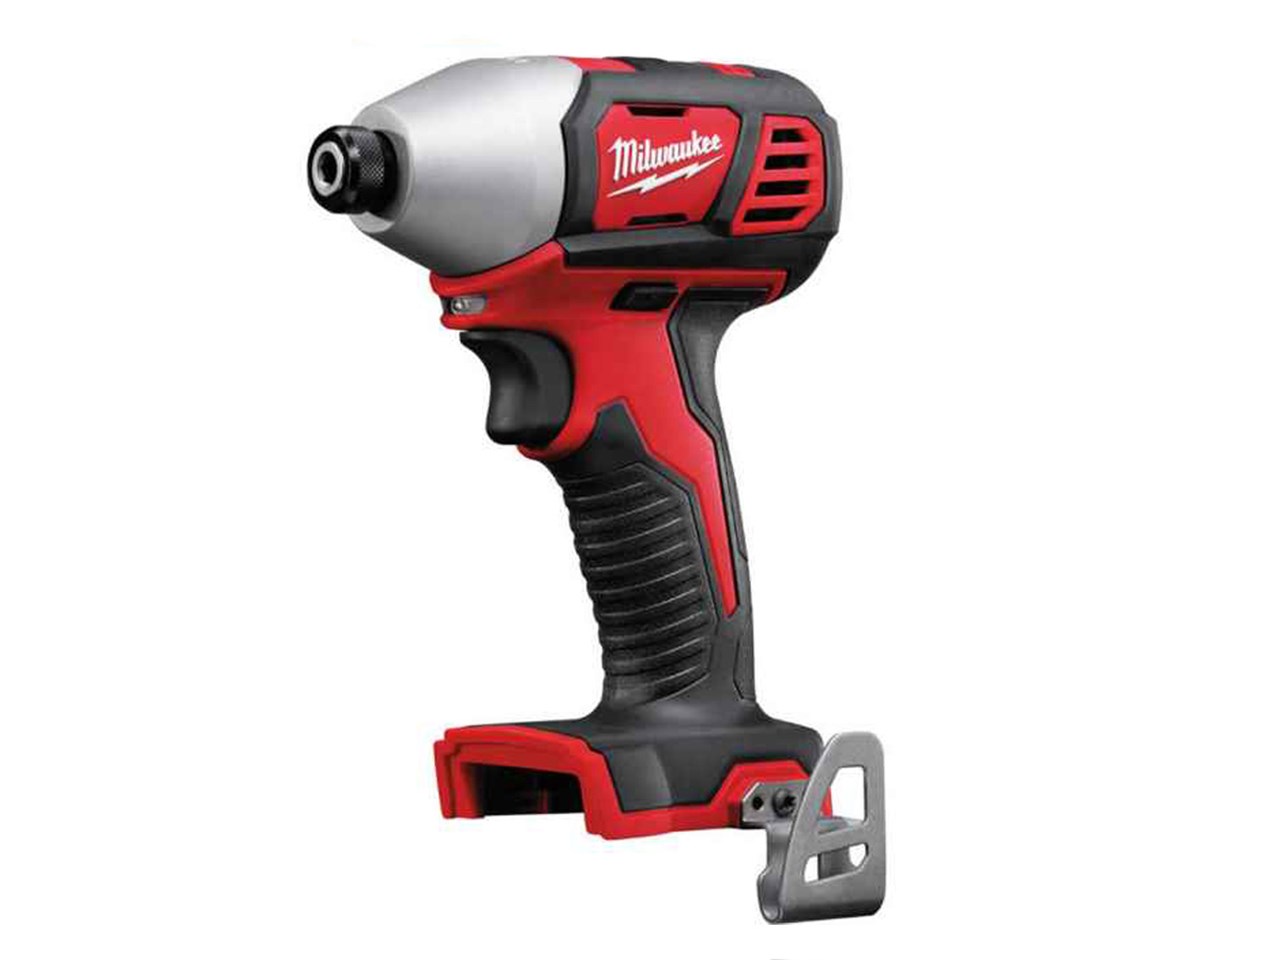 Milwaukee M18 BIW380 Comp 3/8in ImpactWrench18V Bare Unit